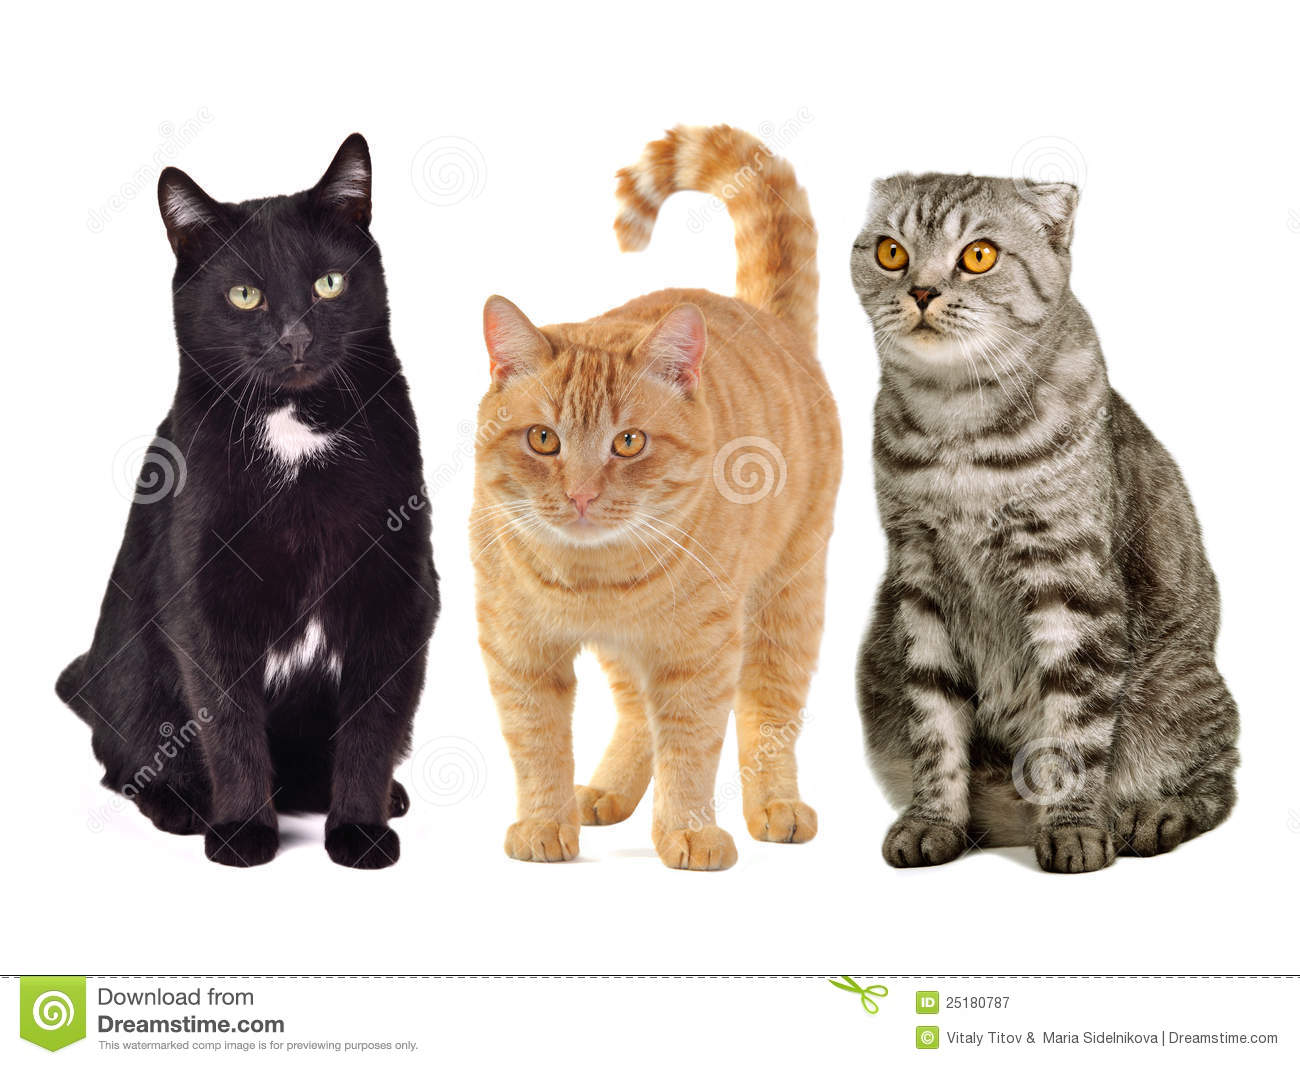 Three Cats Together Royalty Free Stock Photography   Image  25180787